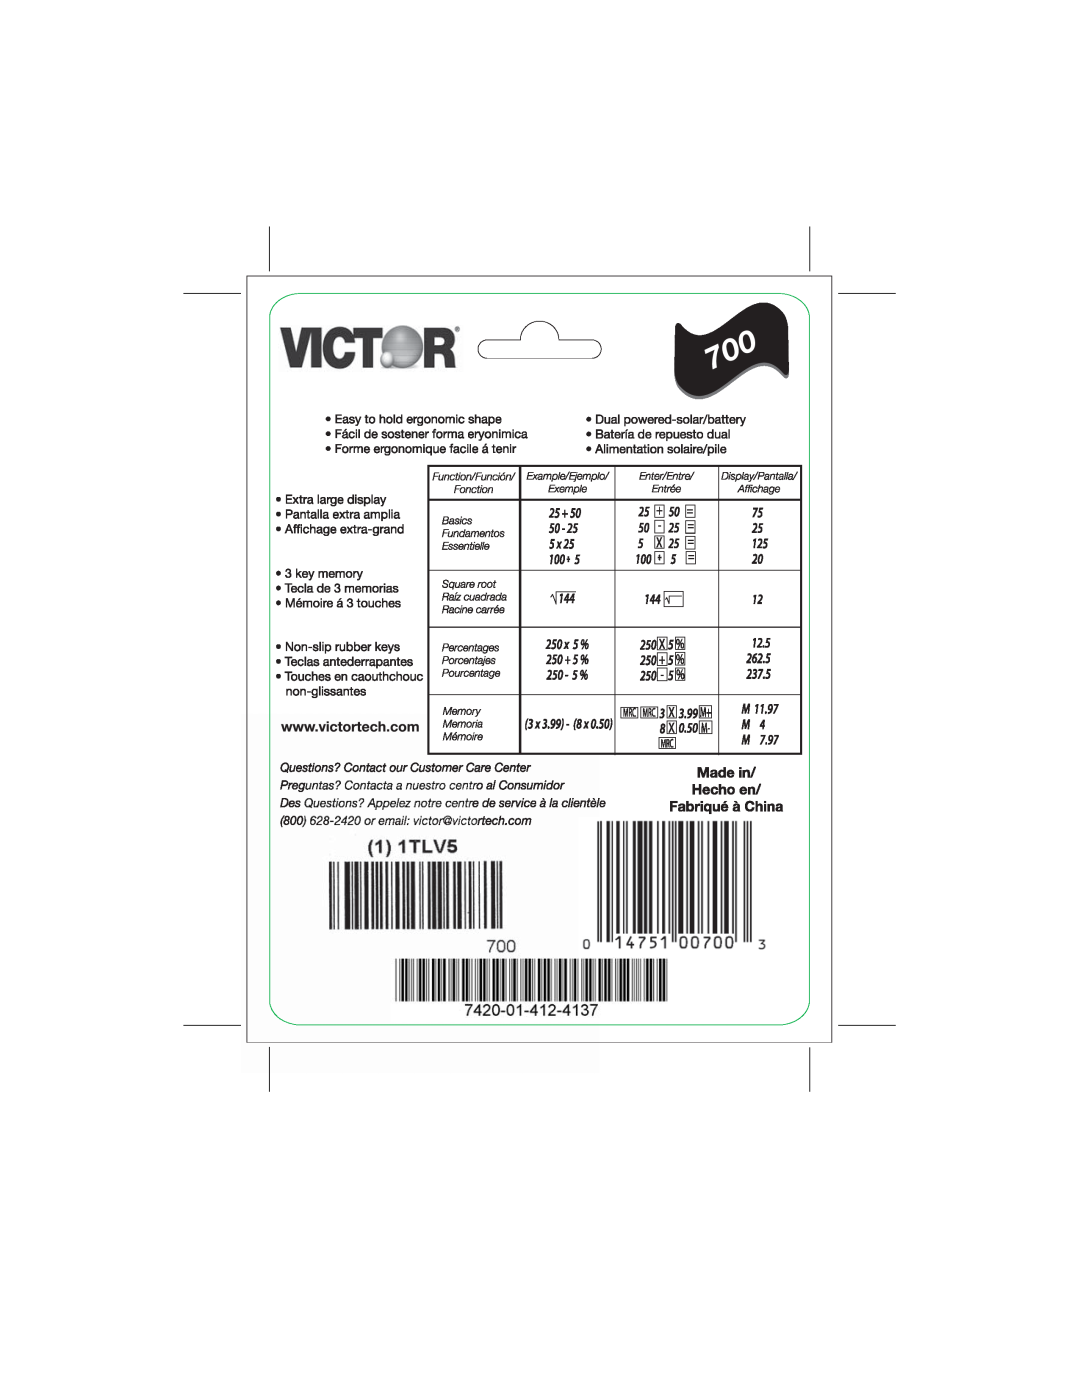 Victor Technology 700 manual 